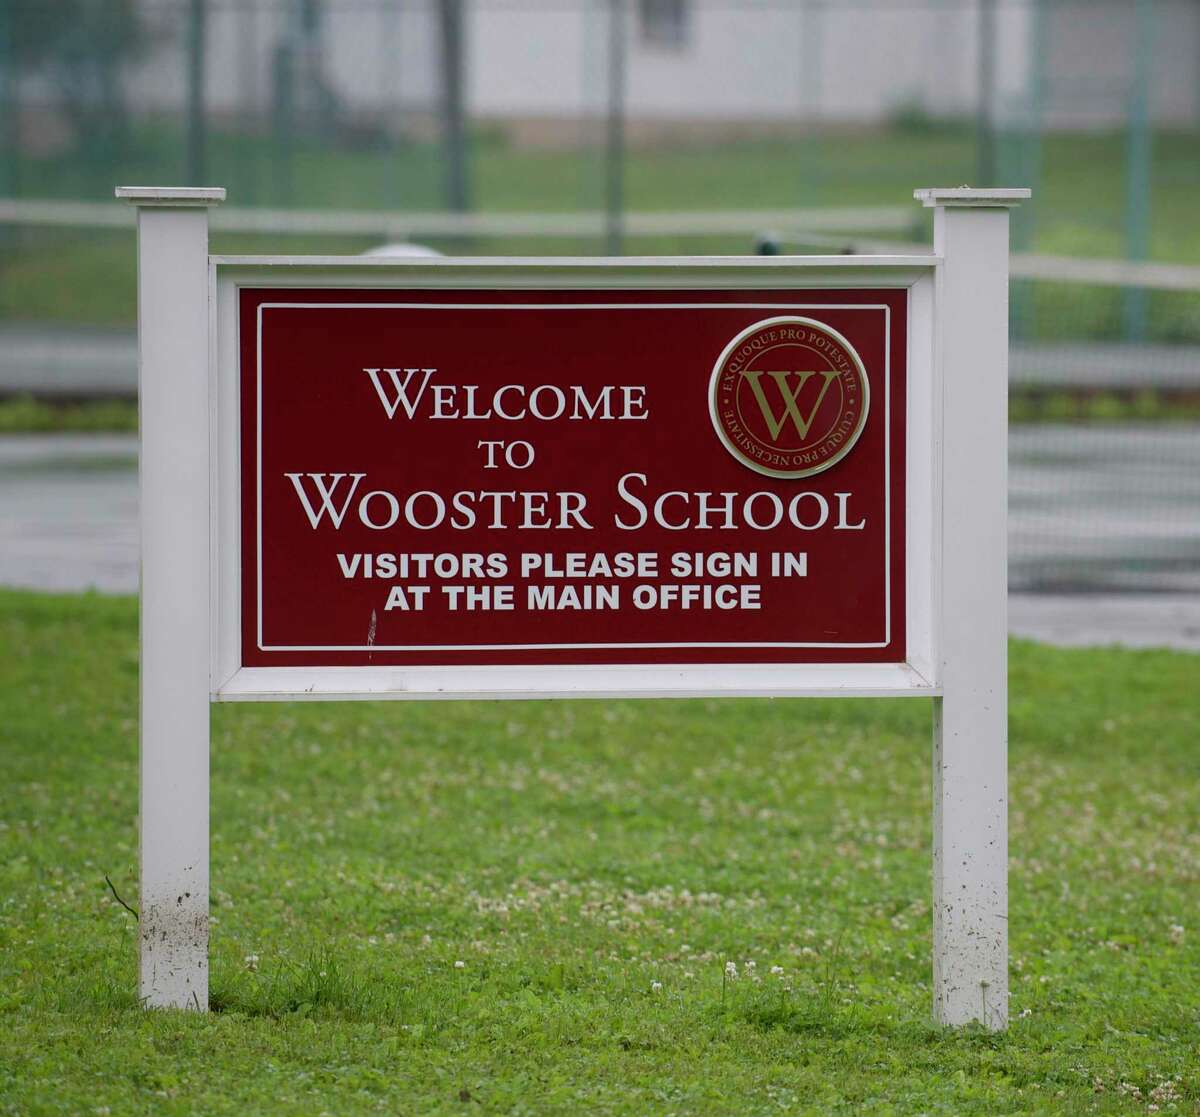 The 2014 Commencement took place at Wooster School, in Danbury, Conn, on Friday morning, June 13, 2014. The school graduated its 87th class, consisting of thirty two students, in a large white tent set up on its campus.